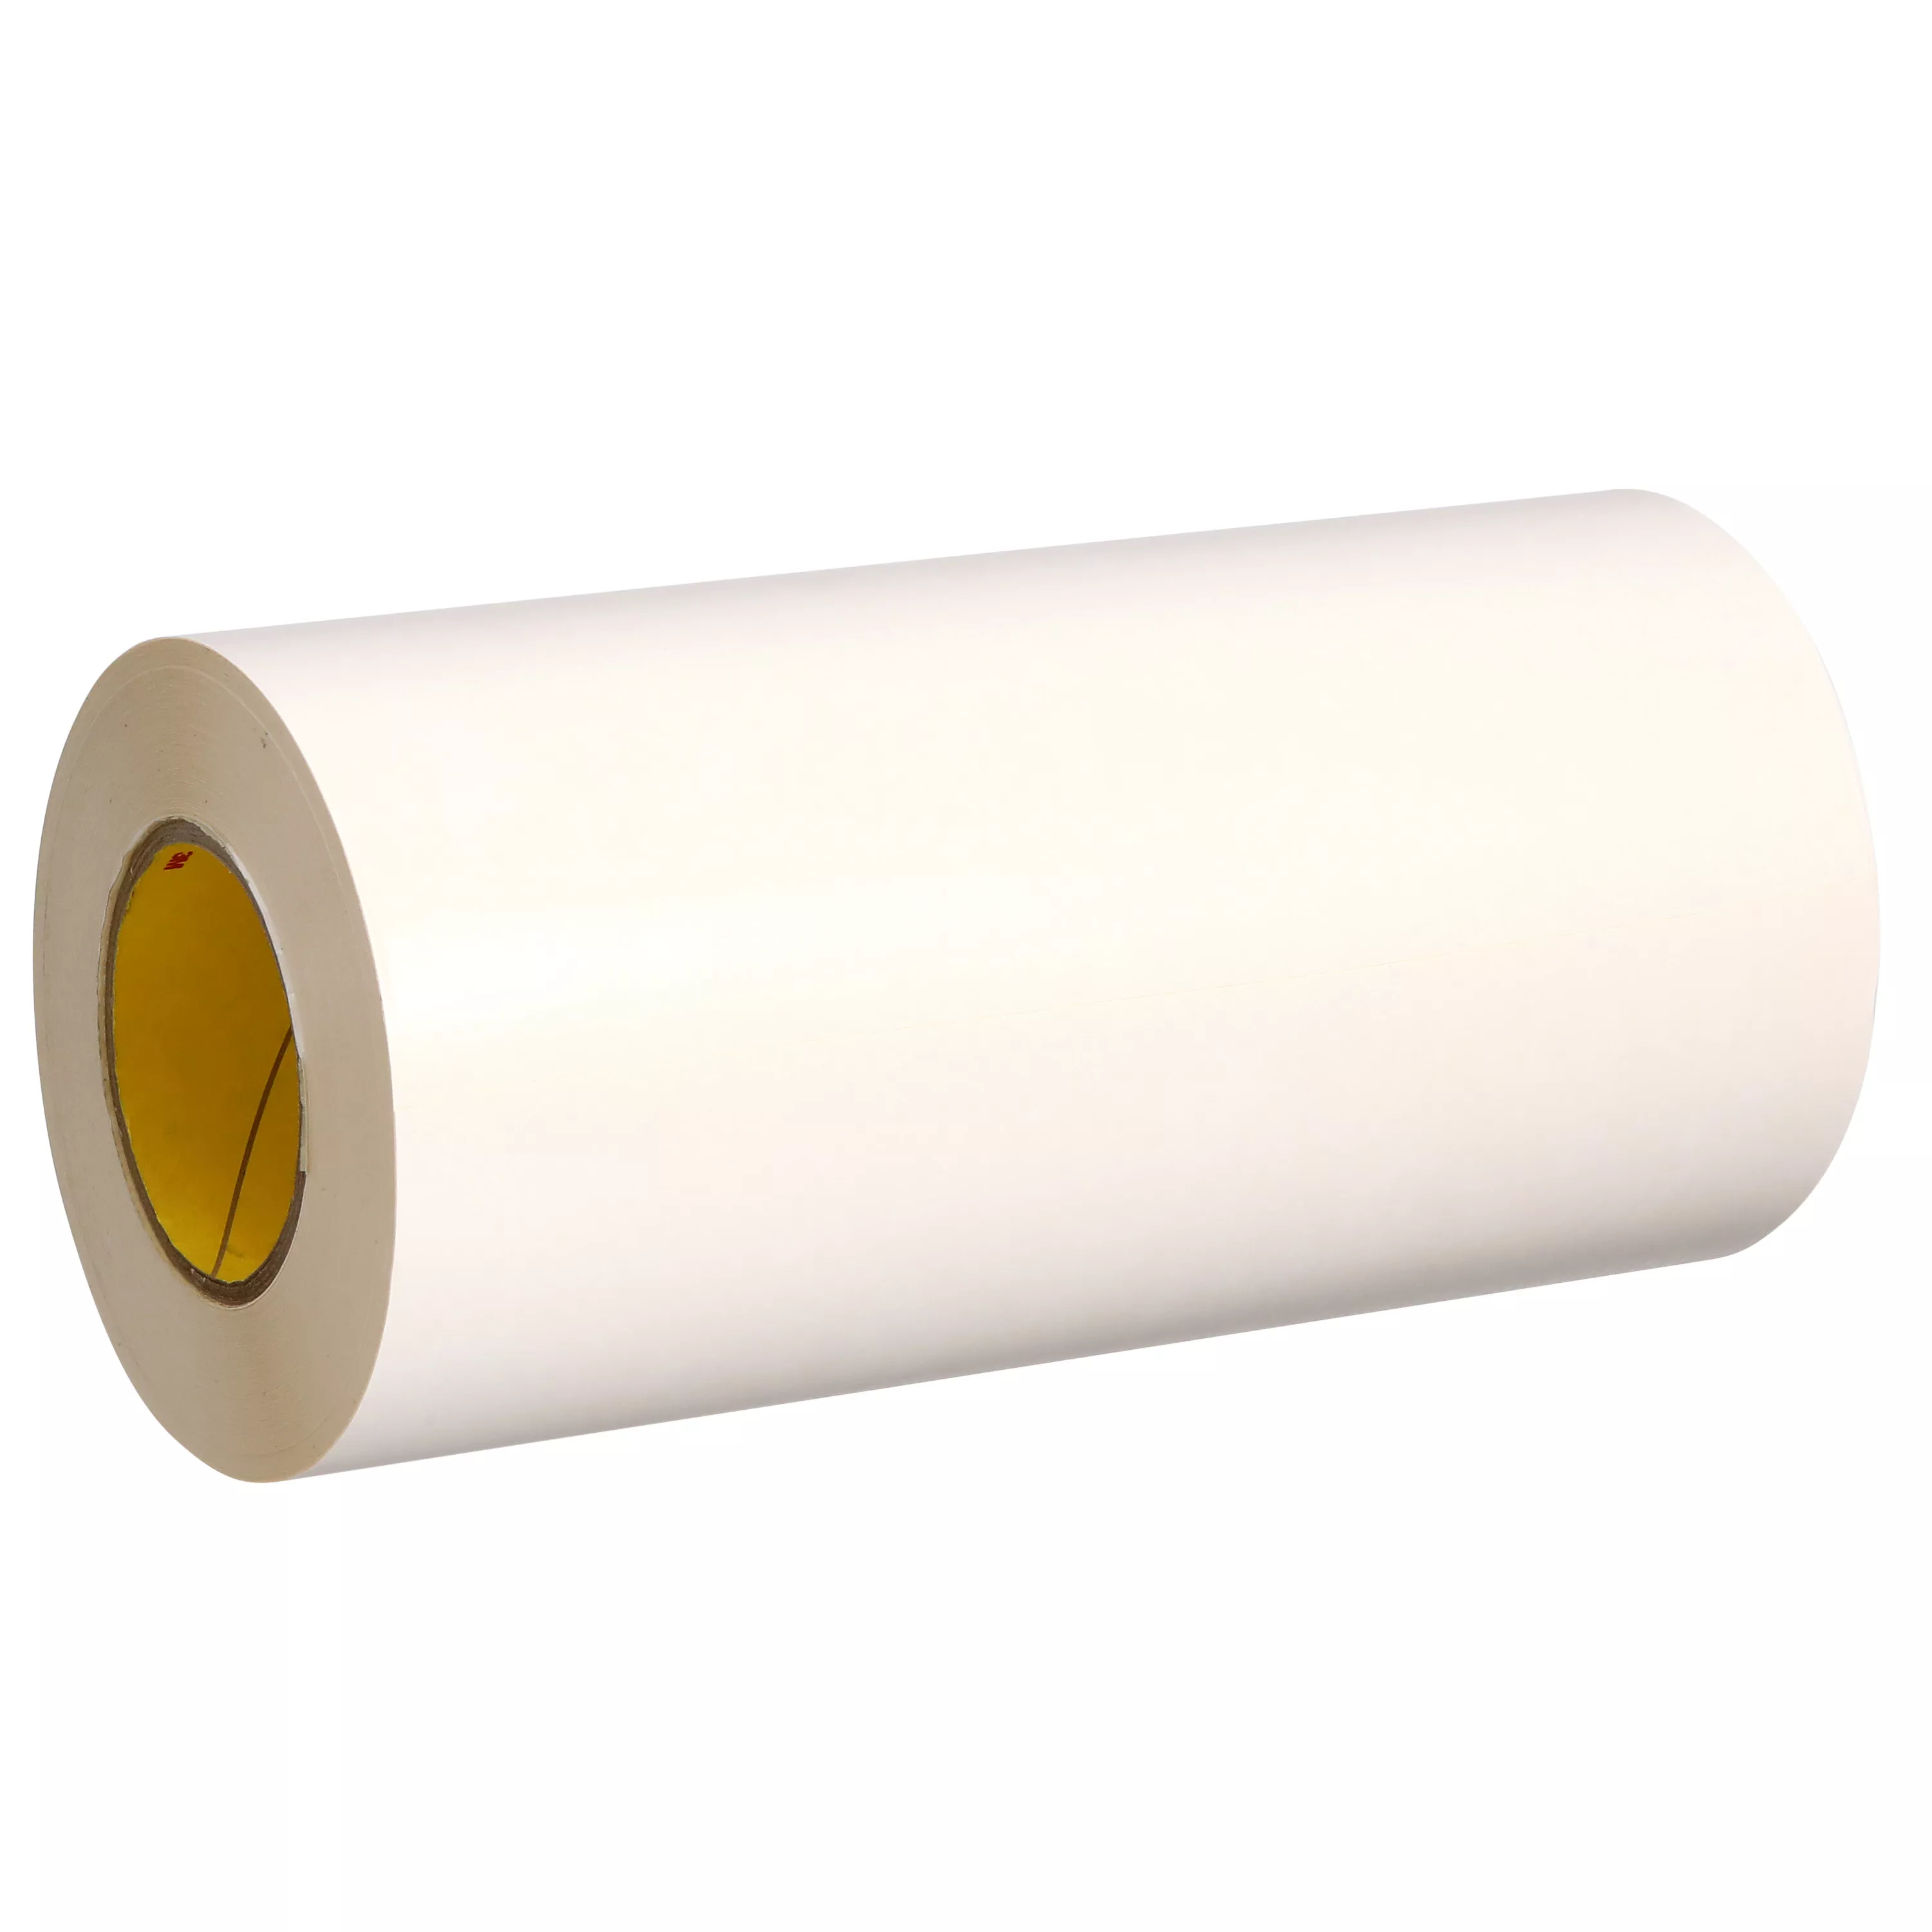 3M™ Double Coated Polyester Tape 442KW, 54 in x 36 yds with No Liner